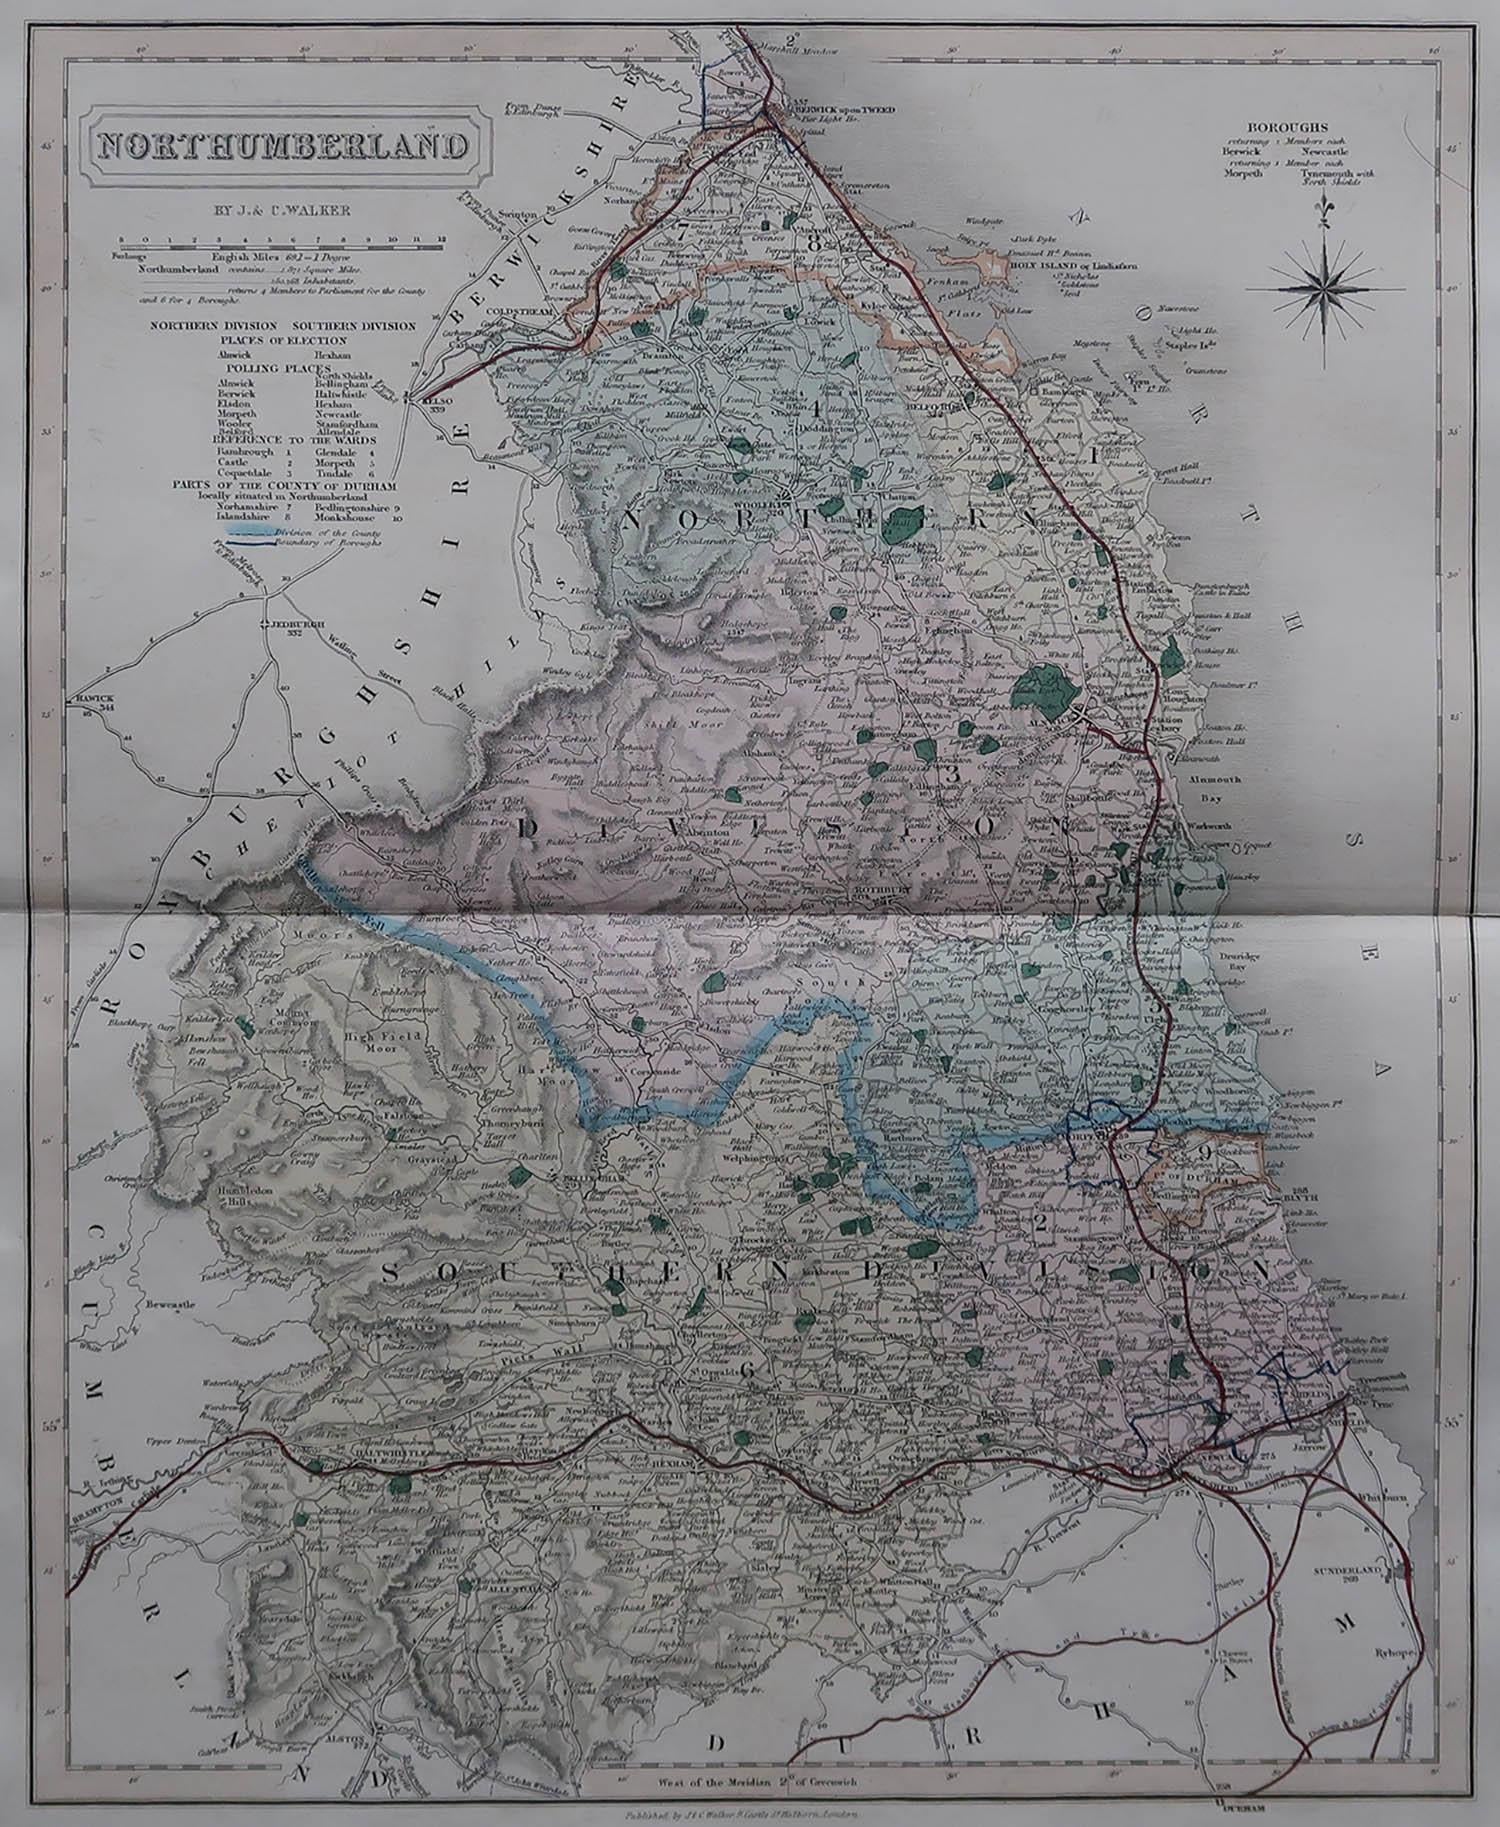 Great map of Northumberland

Original colour

By J & C Walker

Published by Longman, Rees, Orme, Brown & Co. 1851

Unframed.




